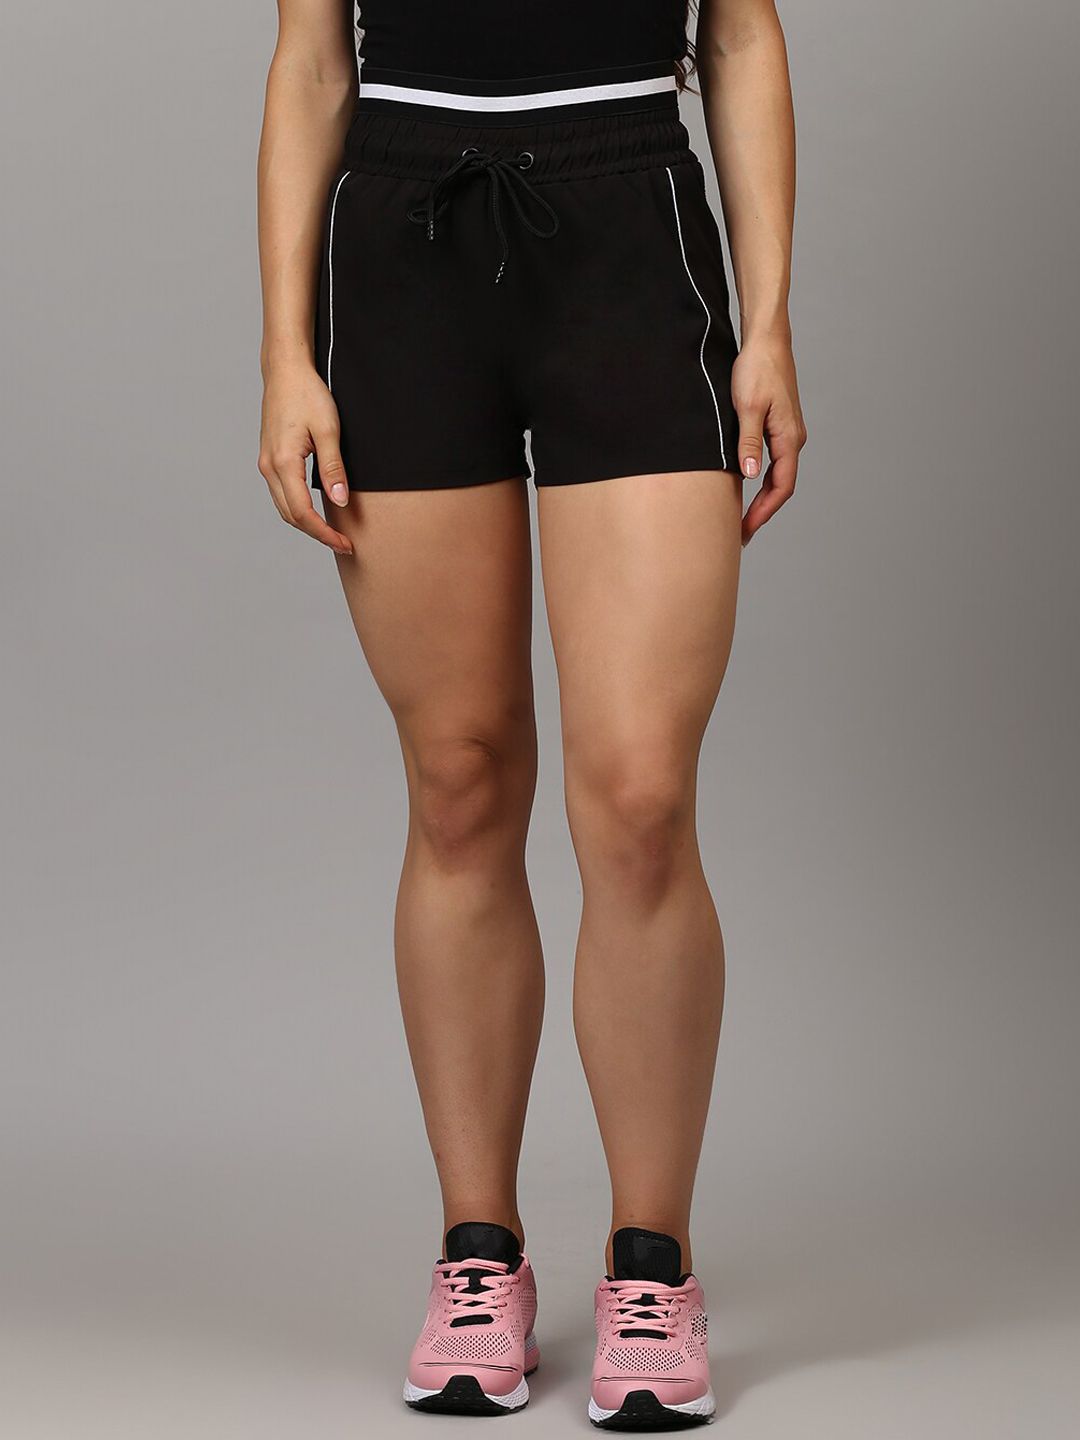 Campus Sutra Women Black Training or Gym Sports Shorts with e-Dry Technology Technology Price in India